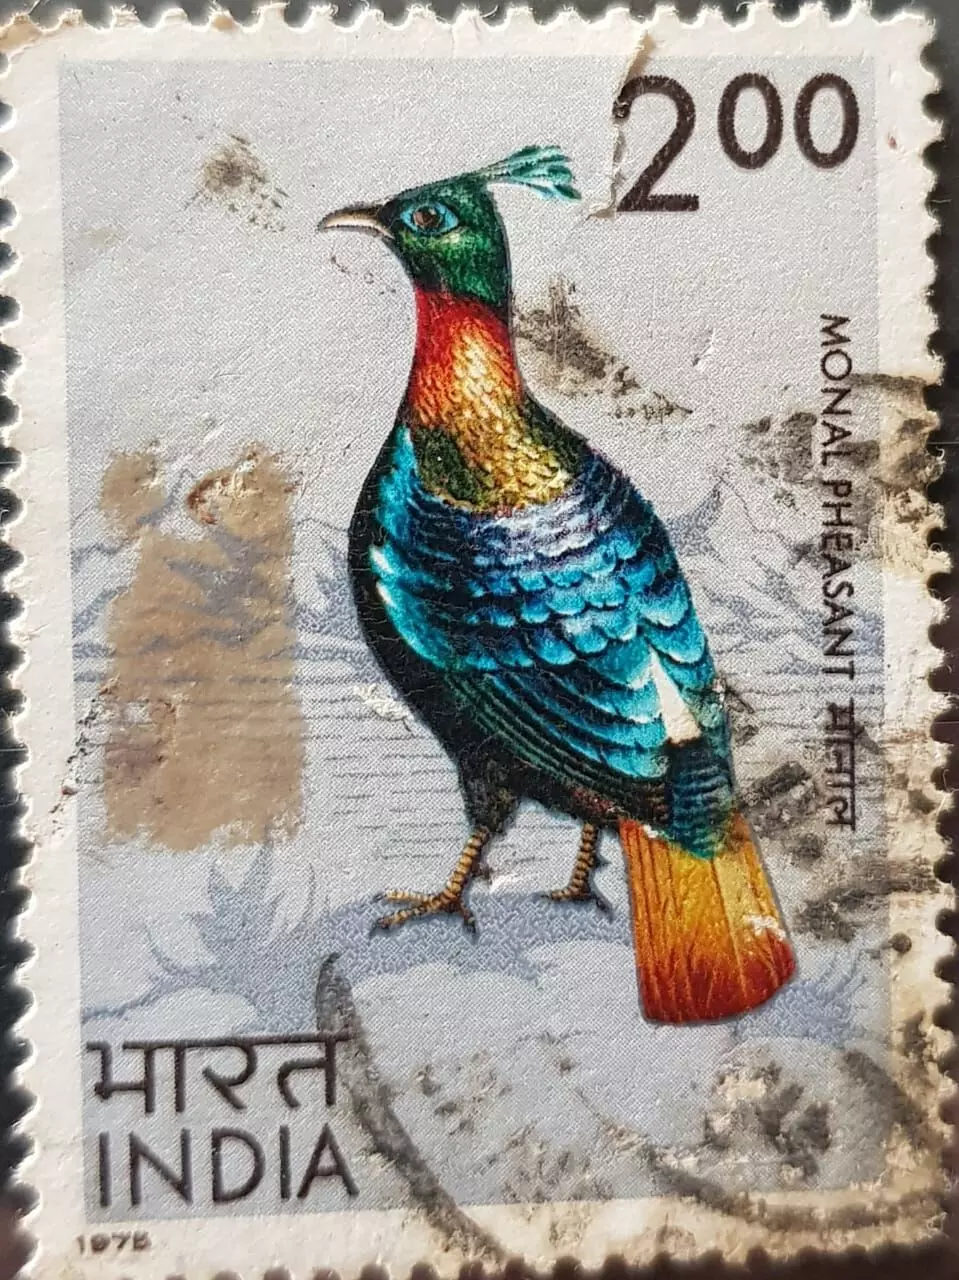 Launching of Parliament of Bird Philatelists FB Page from Vadodara